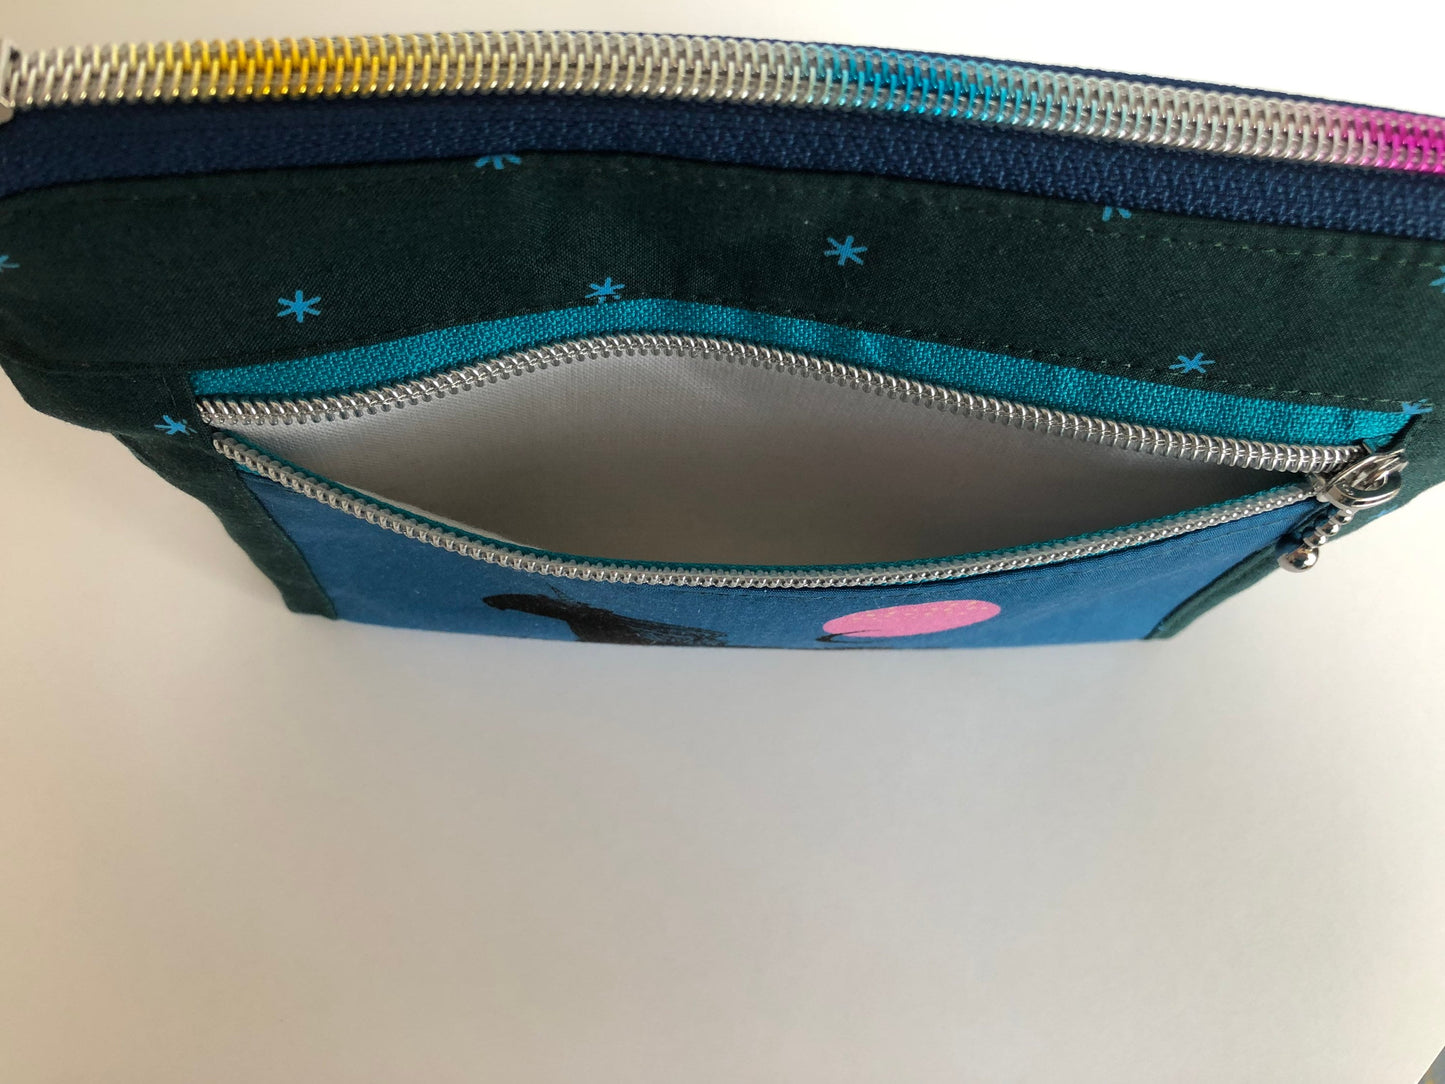 Unicorn and Moon Zipper Pouch with Blue Rainbow and Silver Zippers